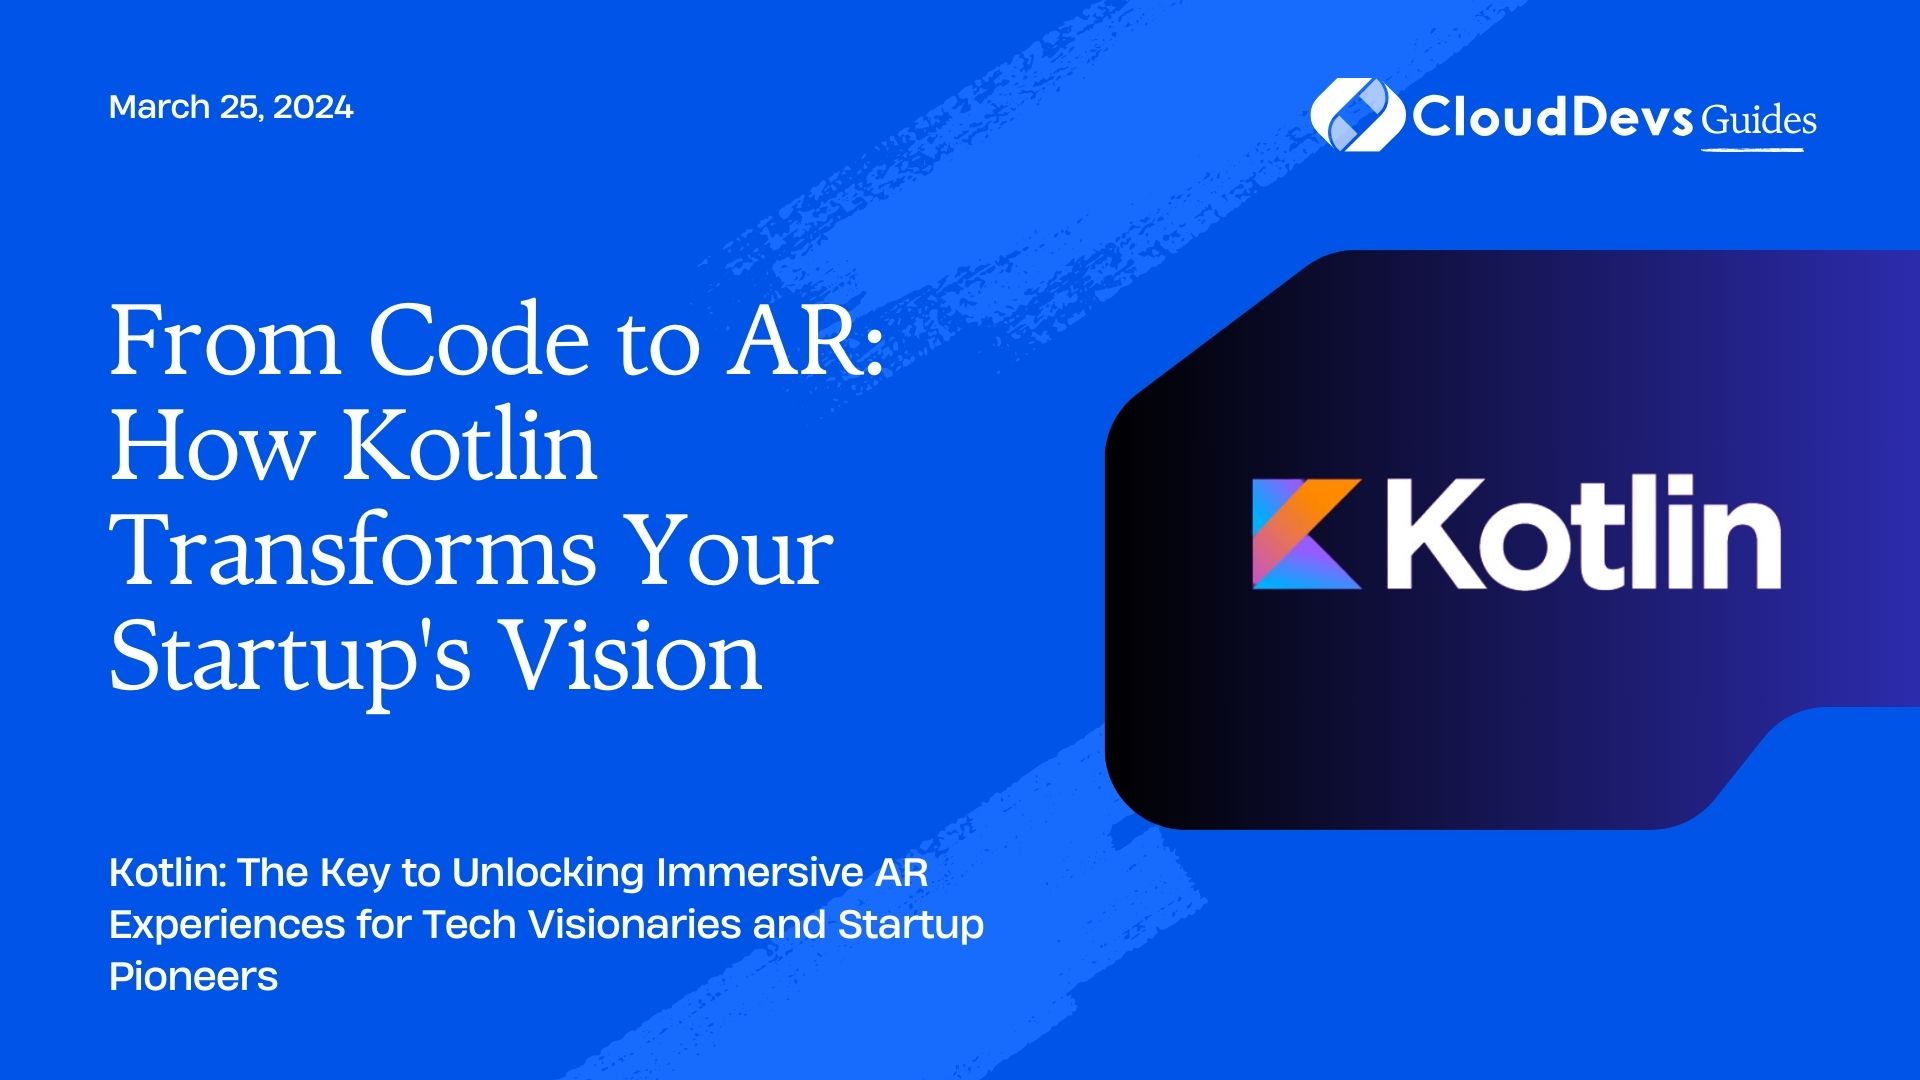 From Code to AR: How Kotlin Transforms Your Startup's Vision